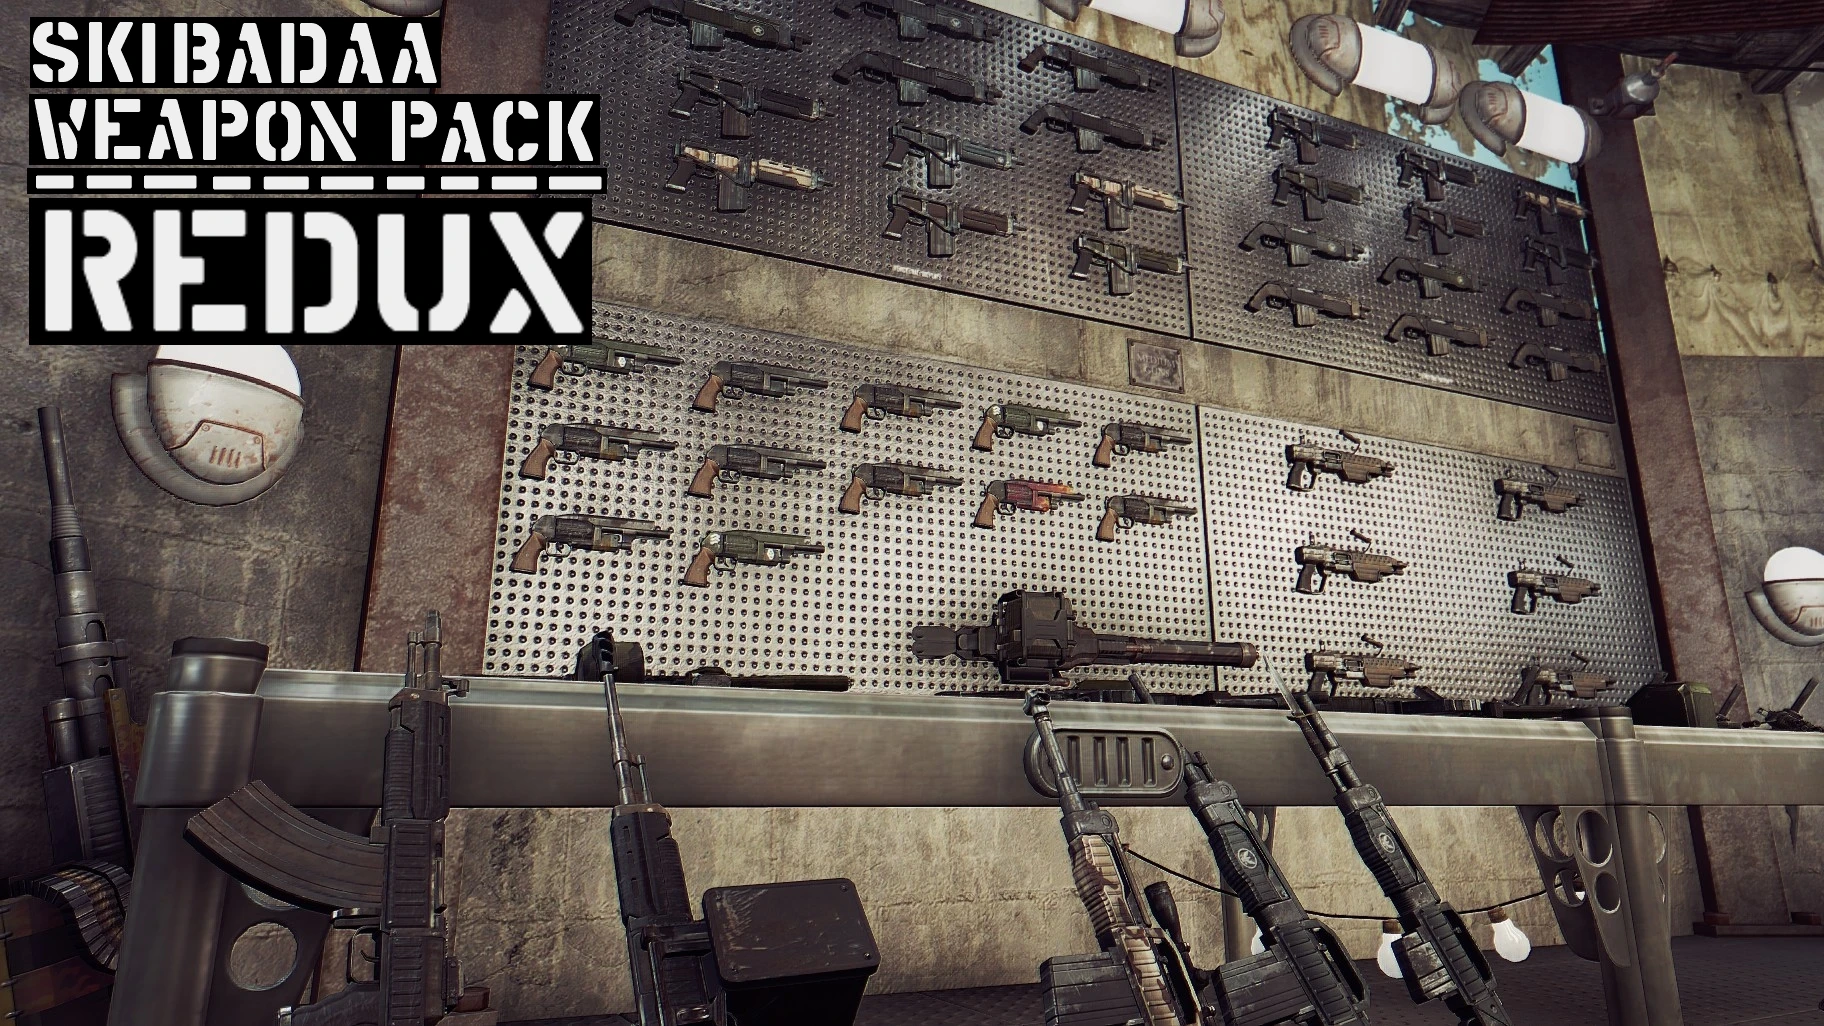 Fallout 4 skibadaa weapon pack rus (119) фото